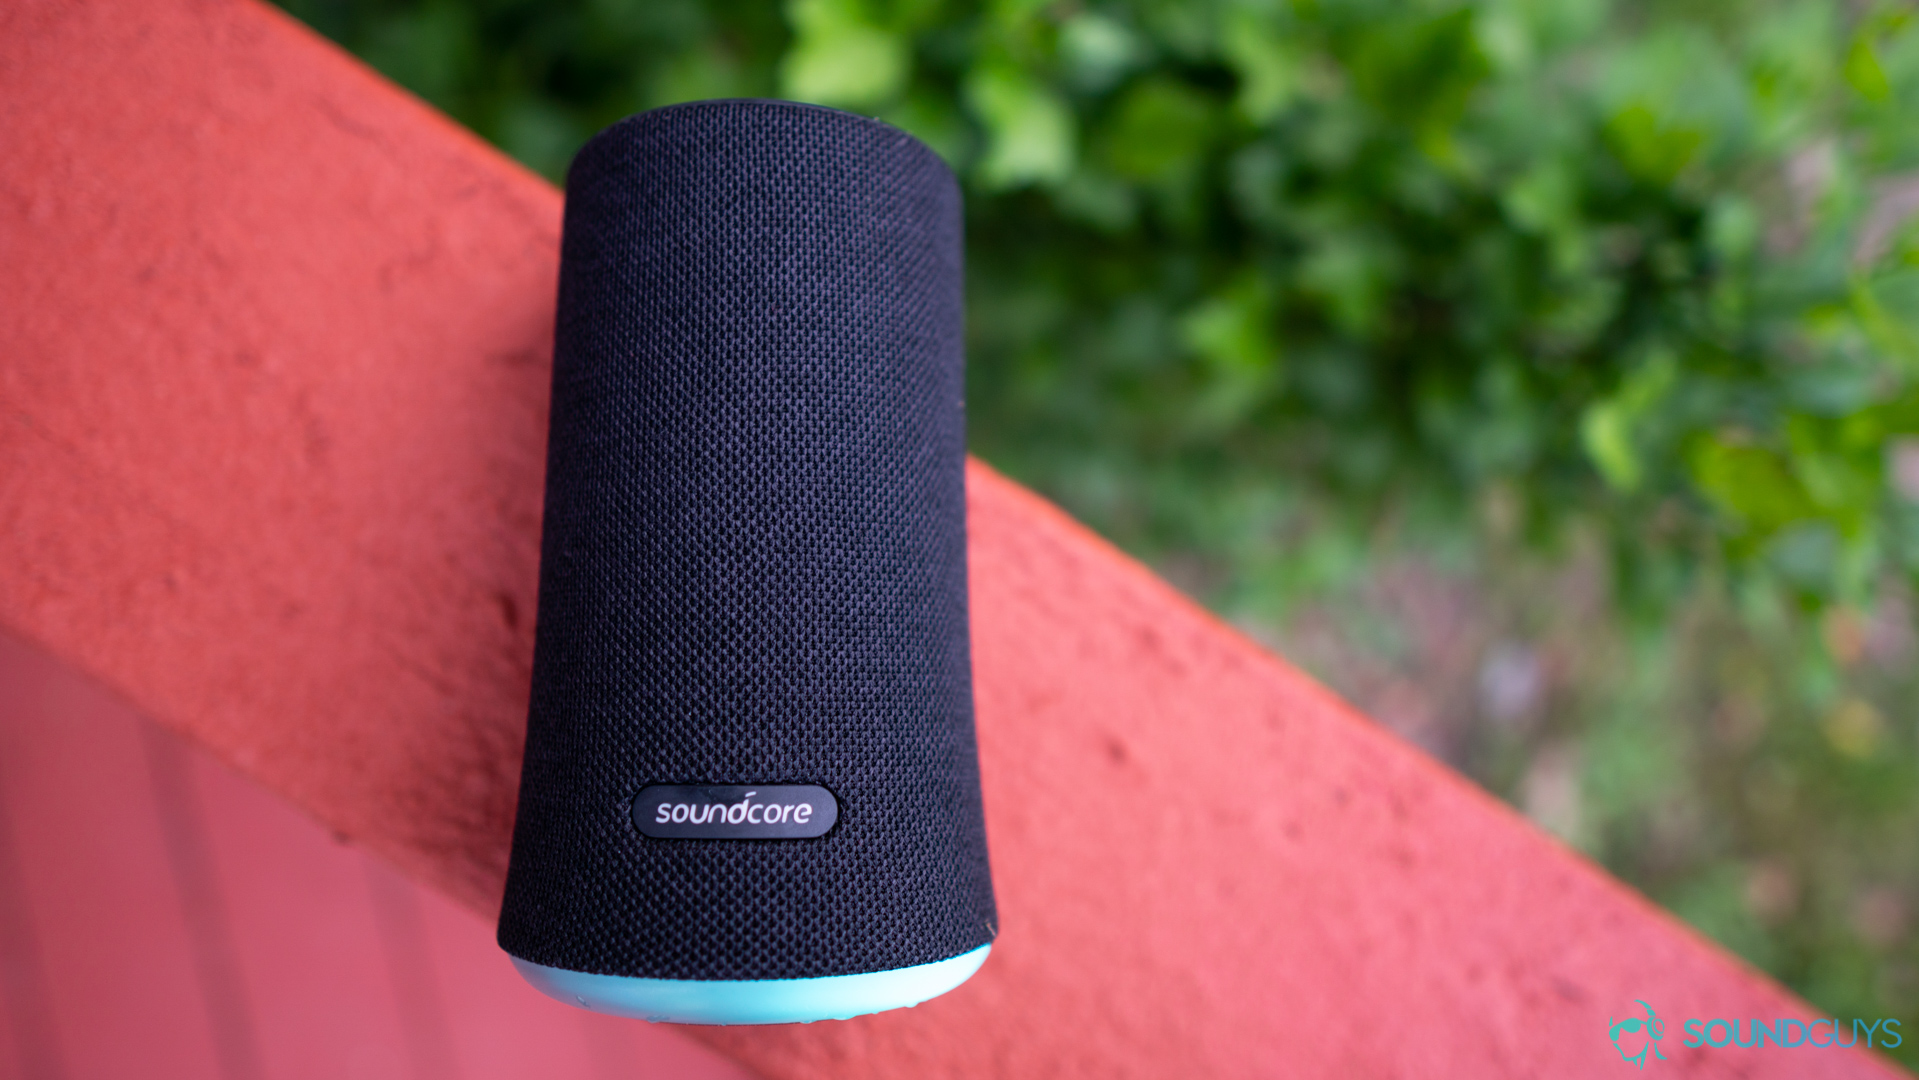 Anker Soundcore Flare pictured from the front.